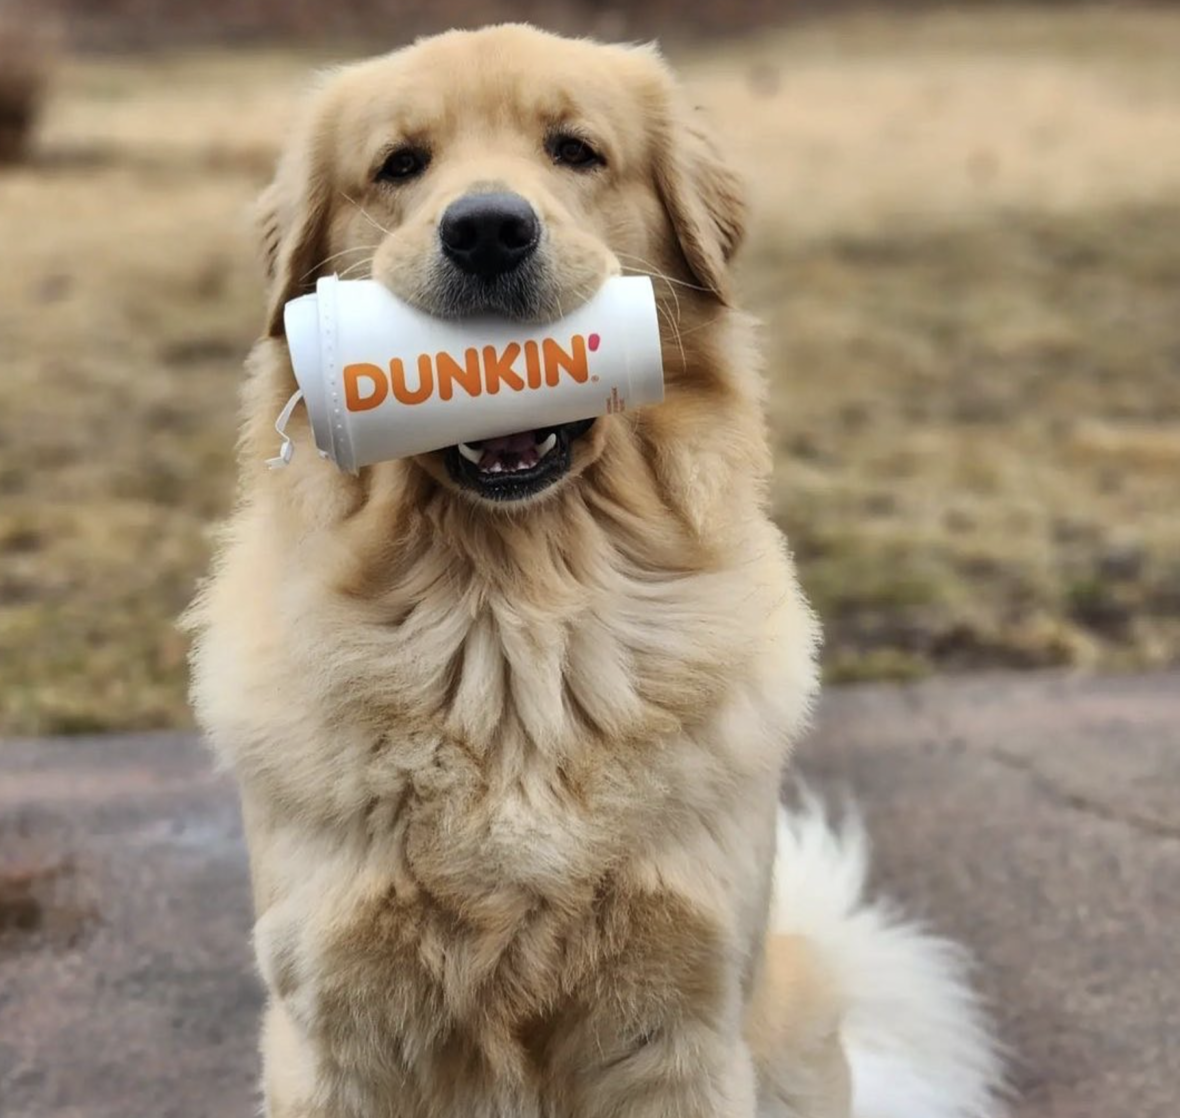 A retriever has Dunkin cup in its mouth